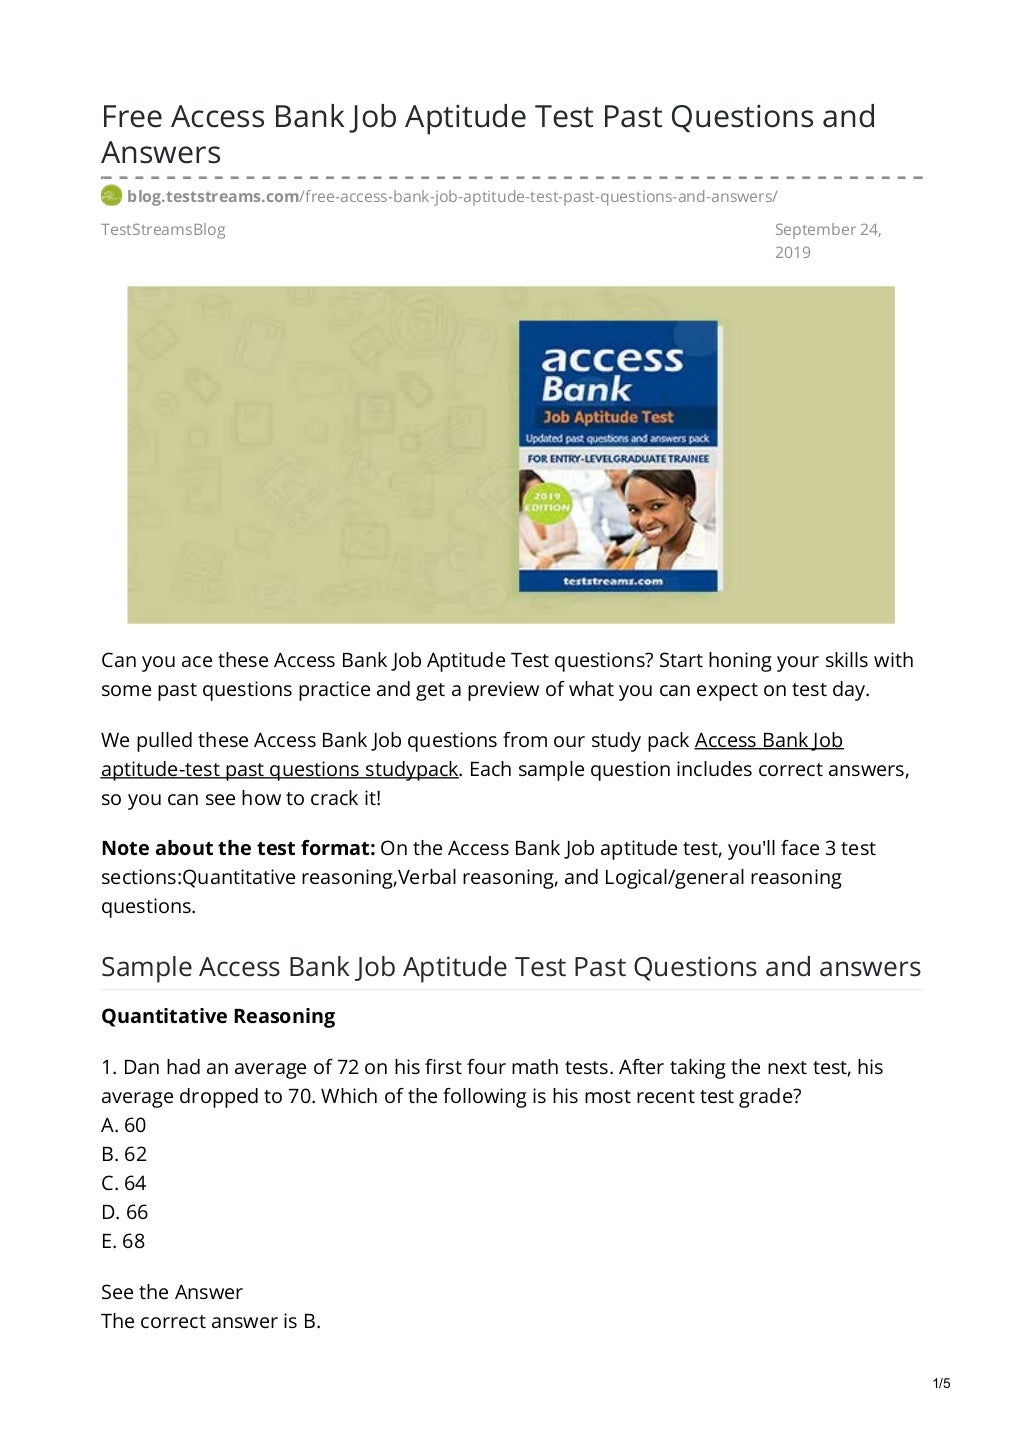 Free Access Bank Job Aptitude Test Past Questions And Answers